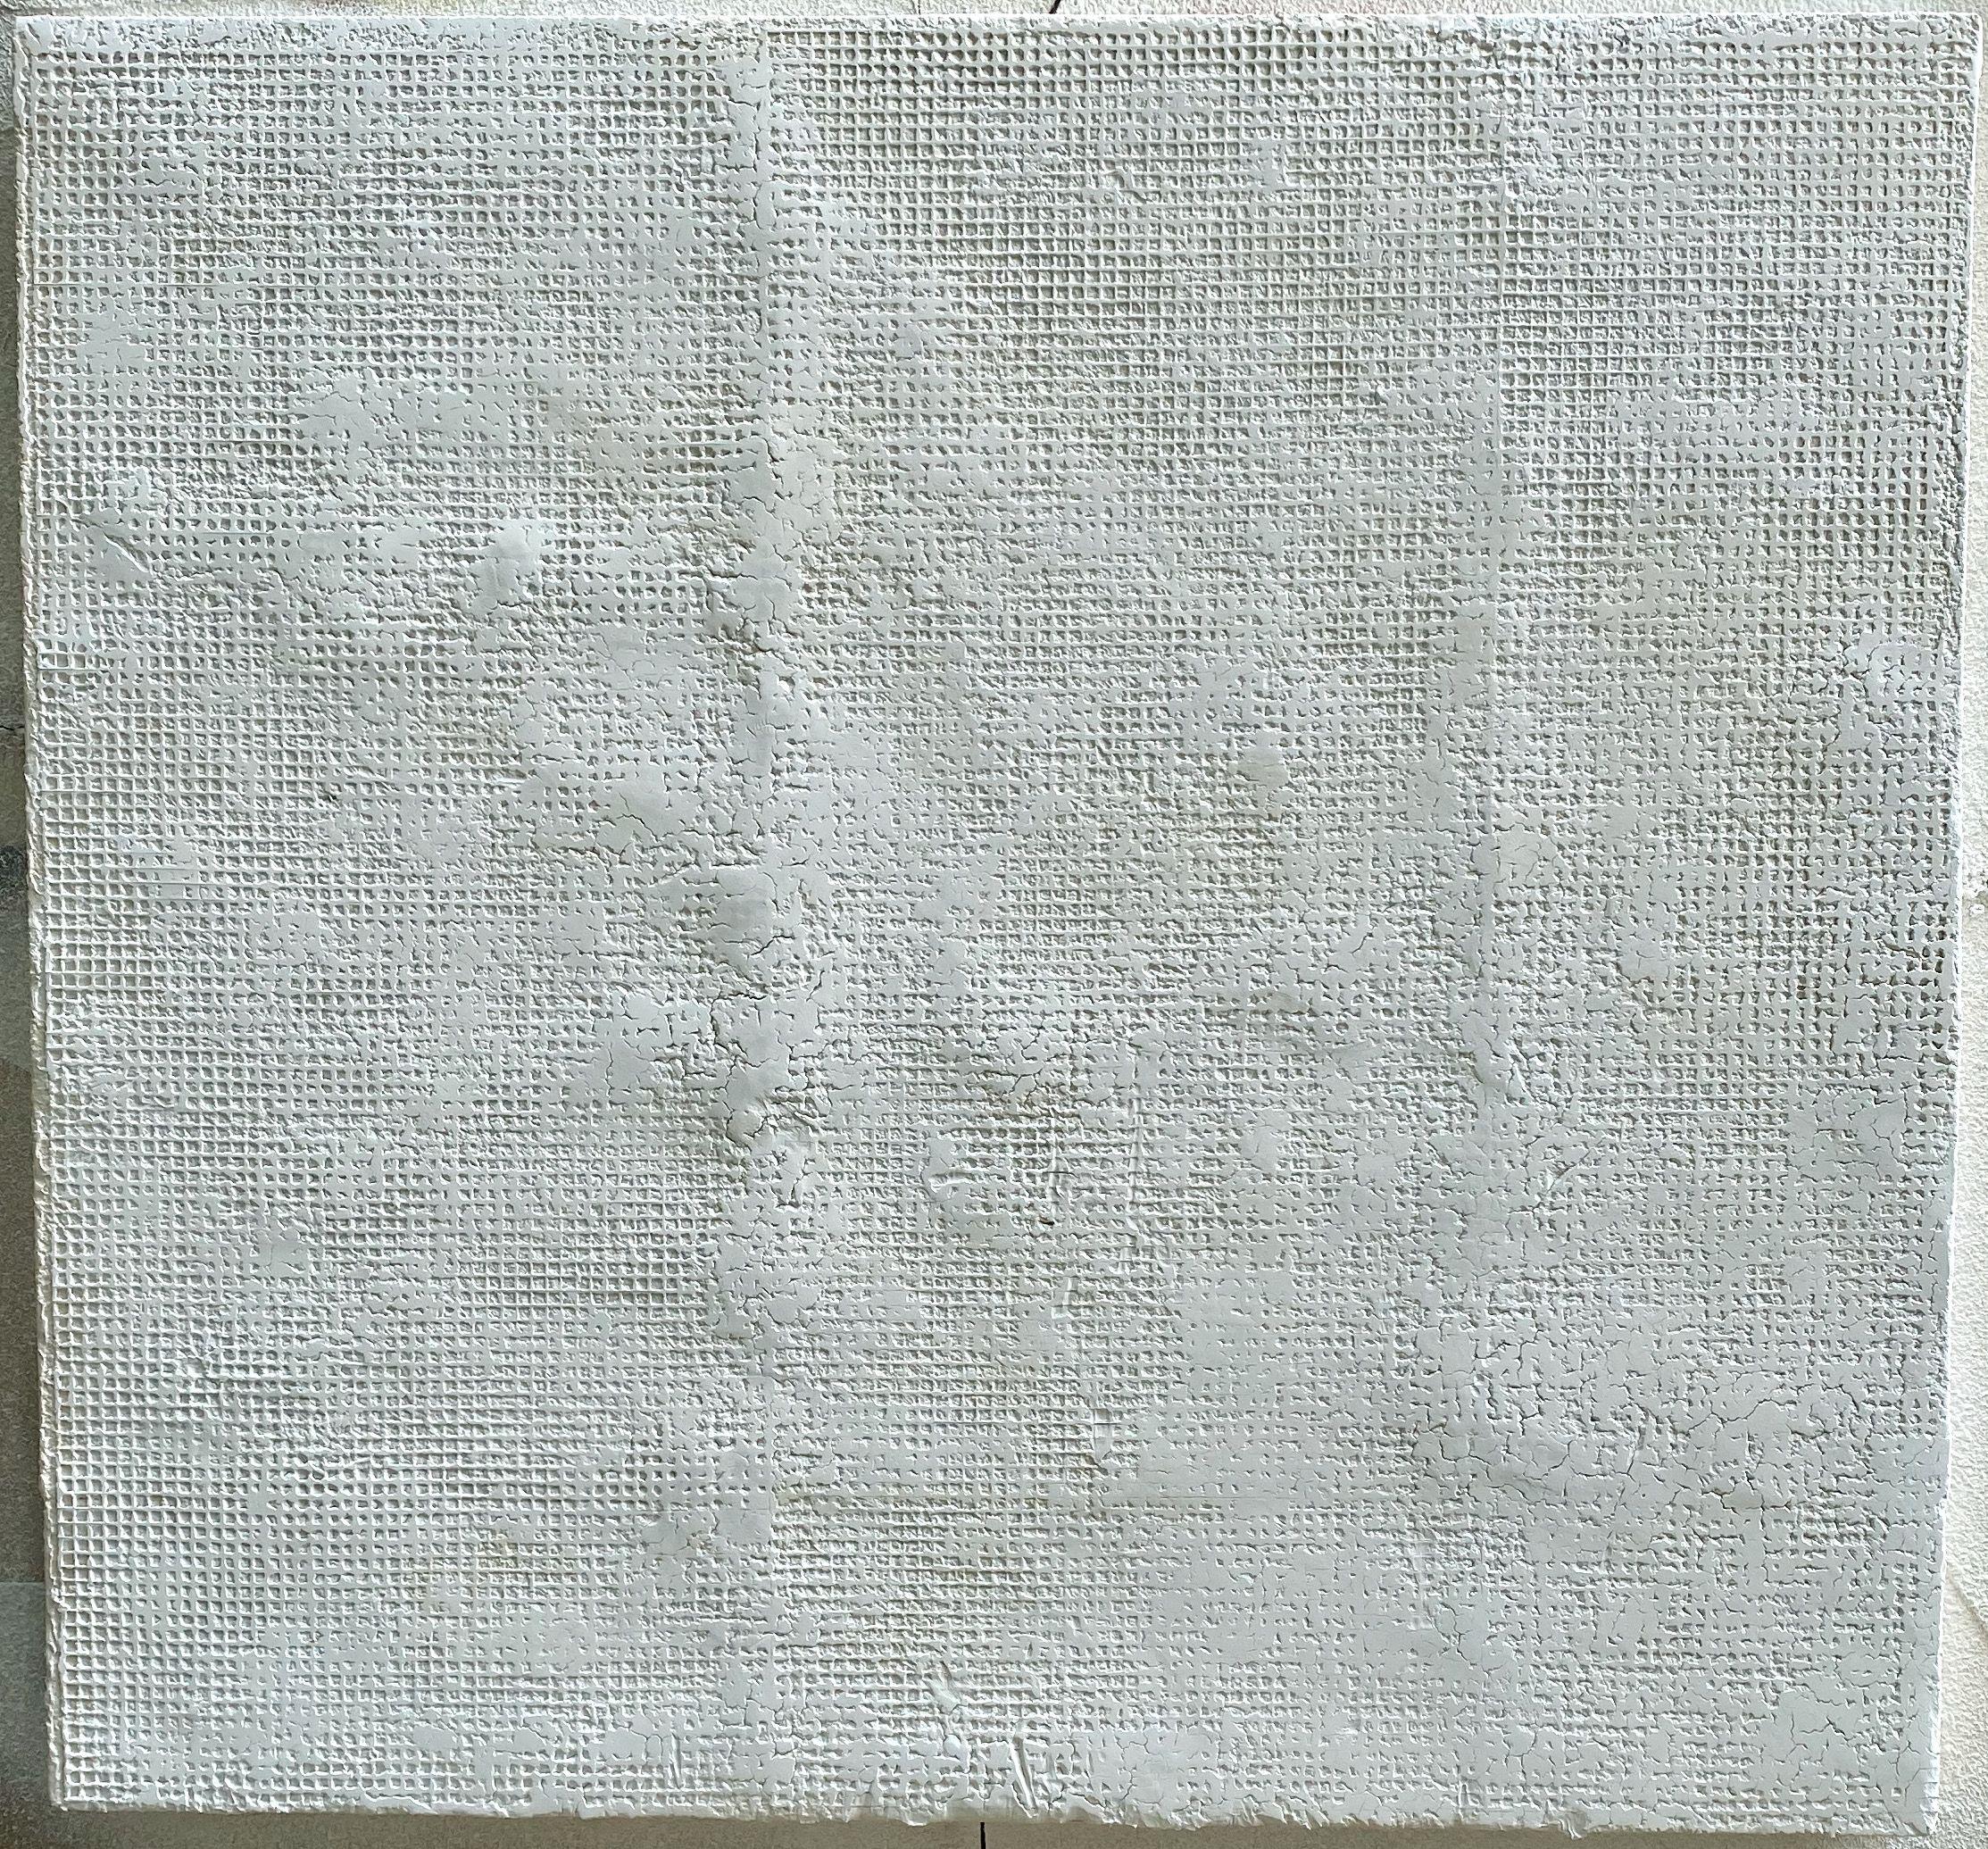 White works, Mixed Media on Other - Mixed Media Art by Joel Blenz